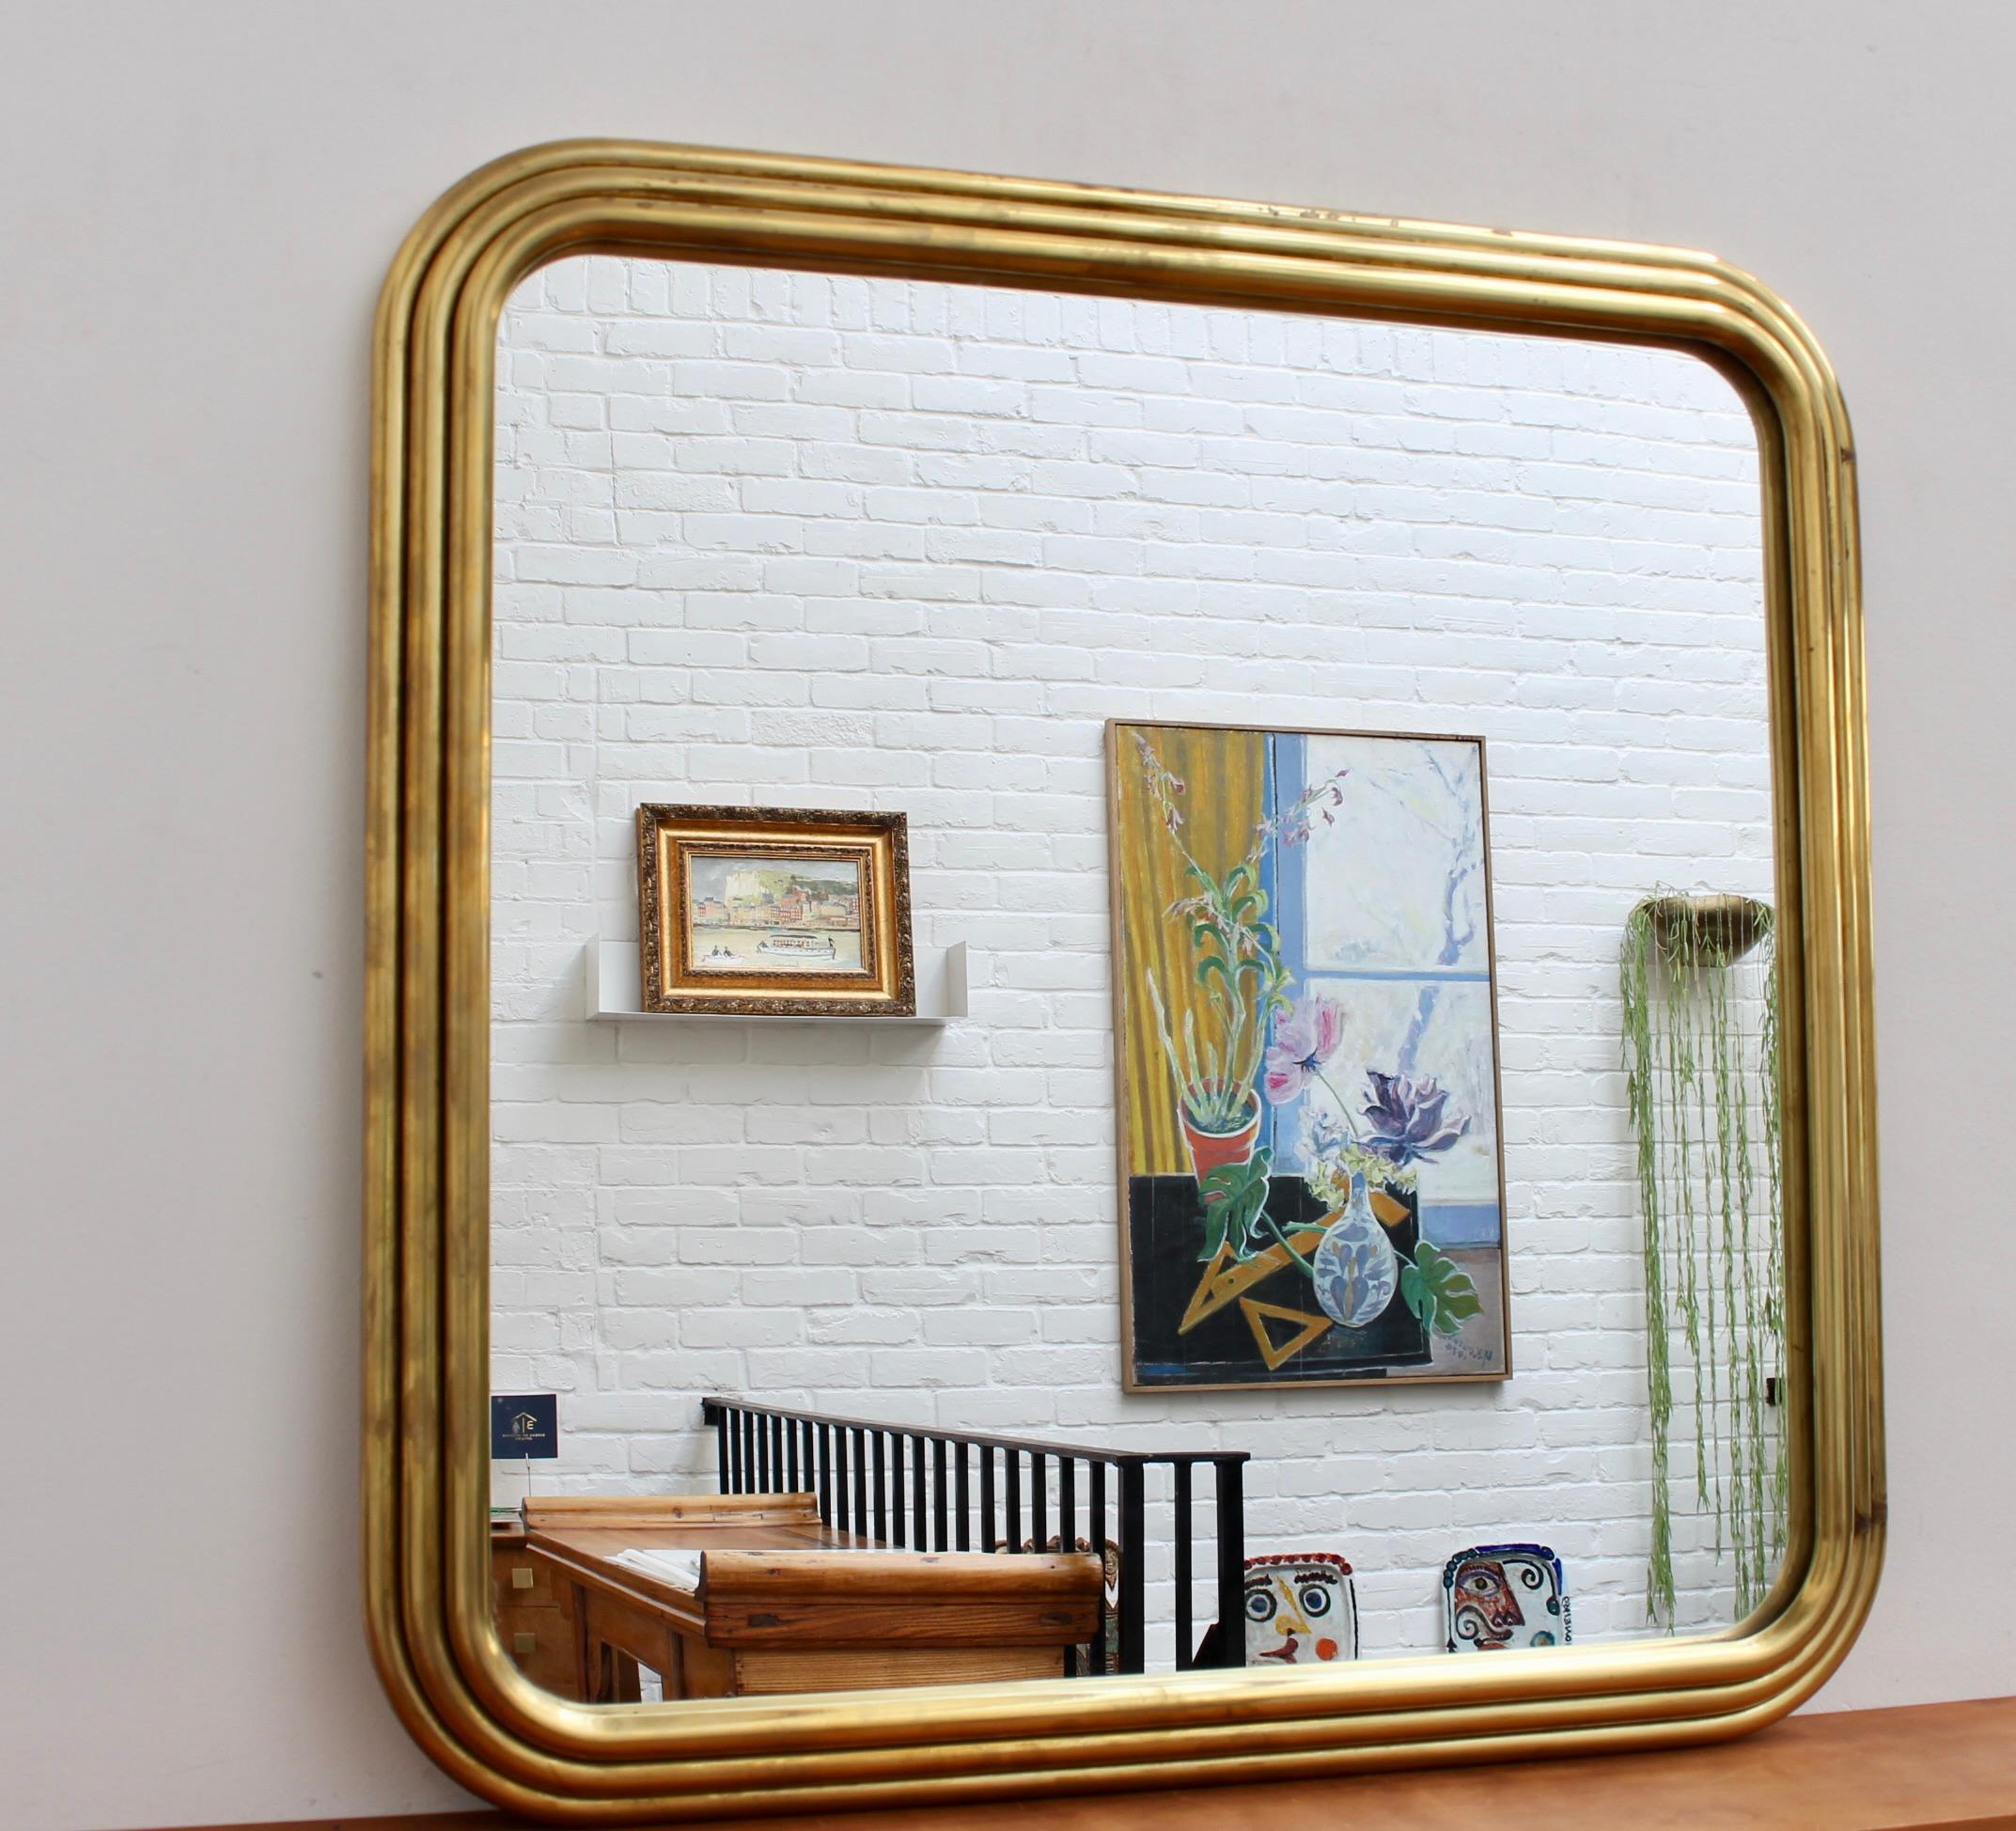 Mid-century Italian Art Deco wall mirror with brass frame (circa 1960s). The mirror is square with sensuously curved edges and an art deco frame with repeating tubular motif frame. Very elegant and distinctive with loads of vintage style. This